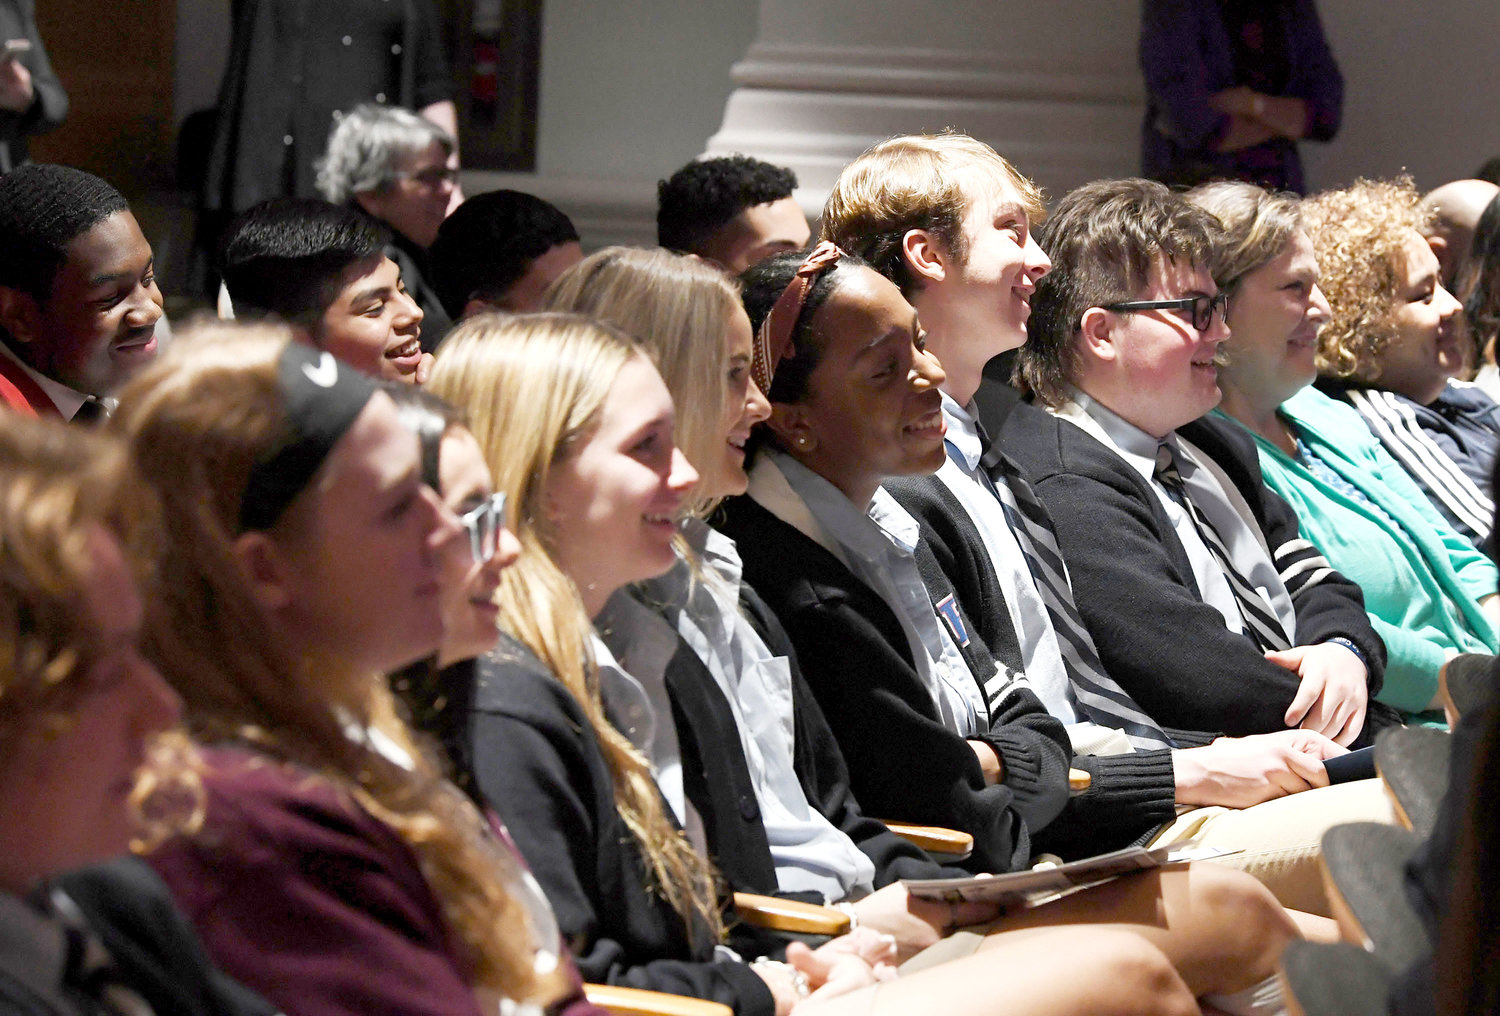 EAGER LEADERS—Catholic high school peers listen to speakers at the fourth annual Student Leadership Conference, “The Culture of Encounter: A Catholic Lens,” March 12 at the Sheen Center for Thought and Culture in lower Manhattan.